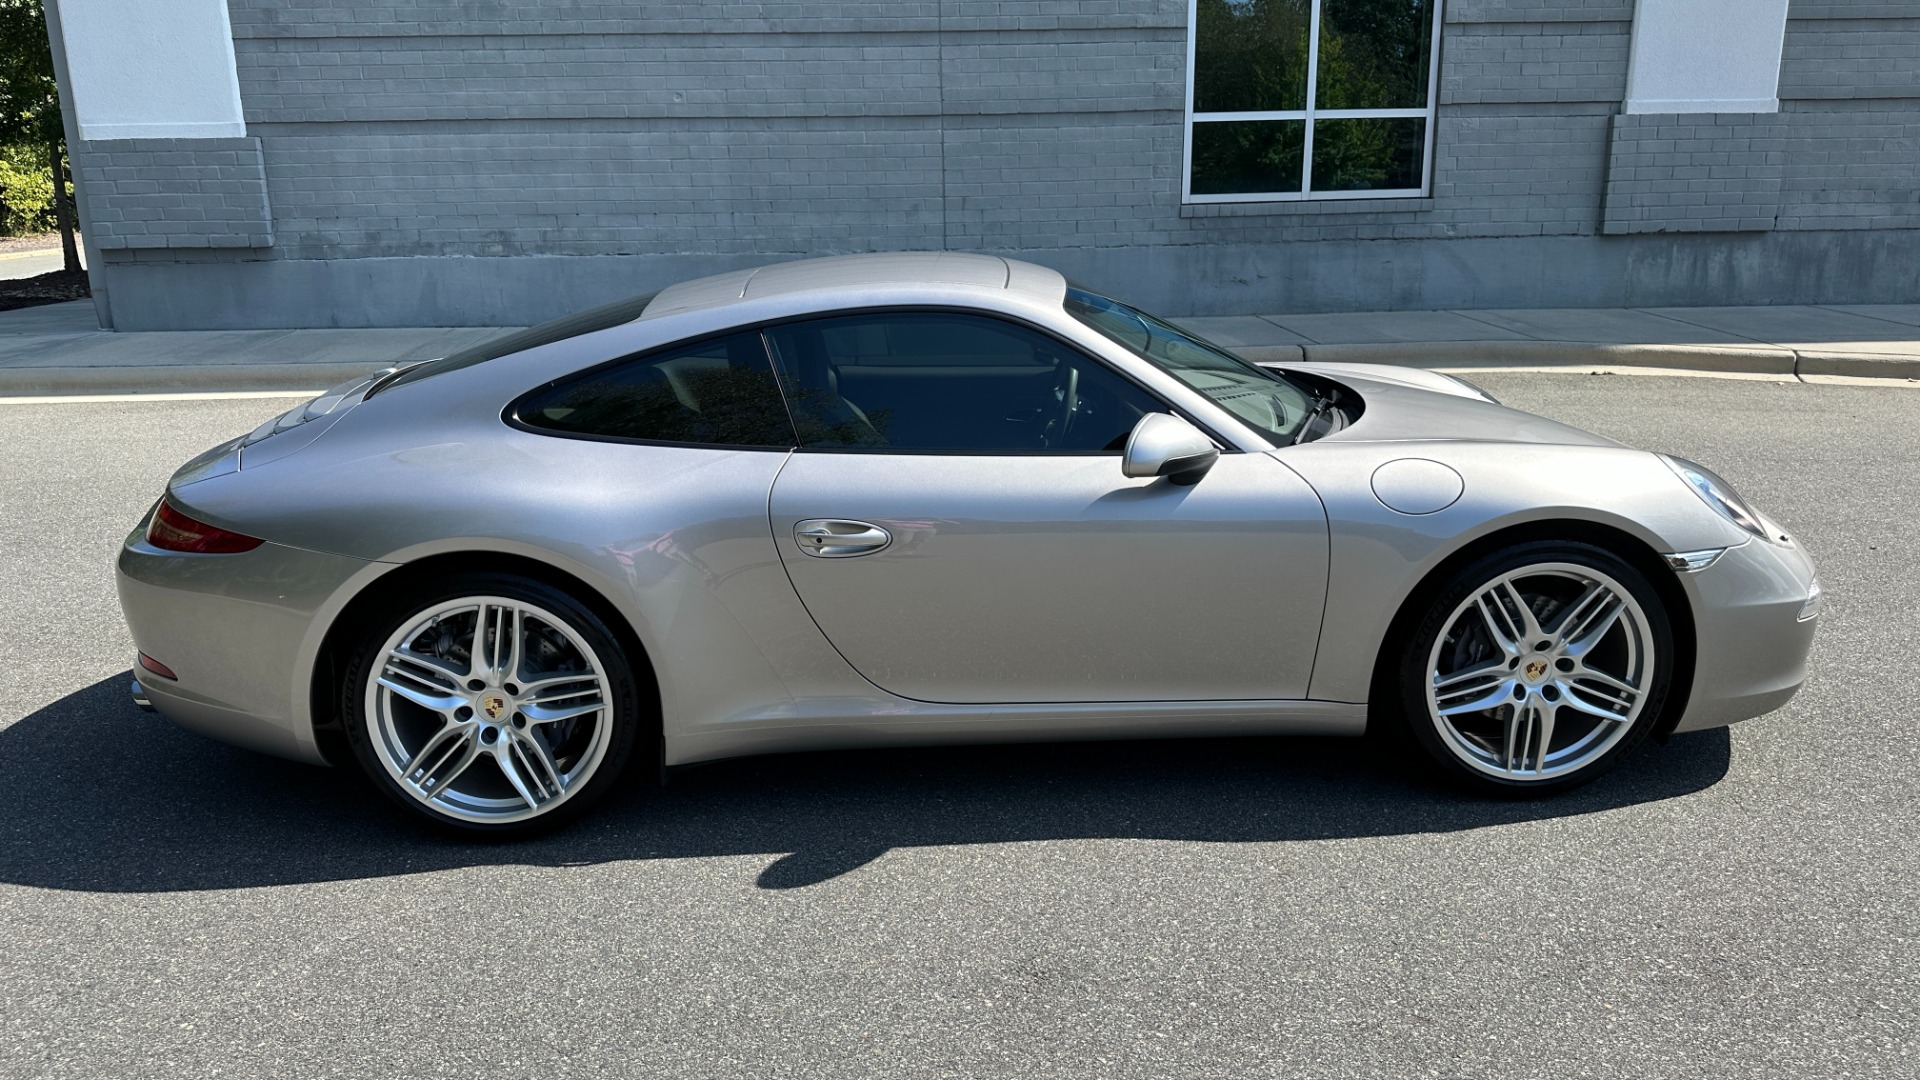 Used 2012 Porsche 911 991 CARRERA / PREMIUM PKG PLUS / SPORT EXHAUST / SPORT SEATS for sale Sold at Formula Imports in Charlotte NC 28227 3